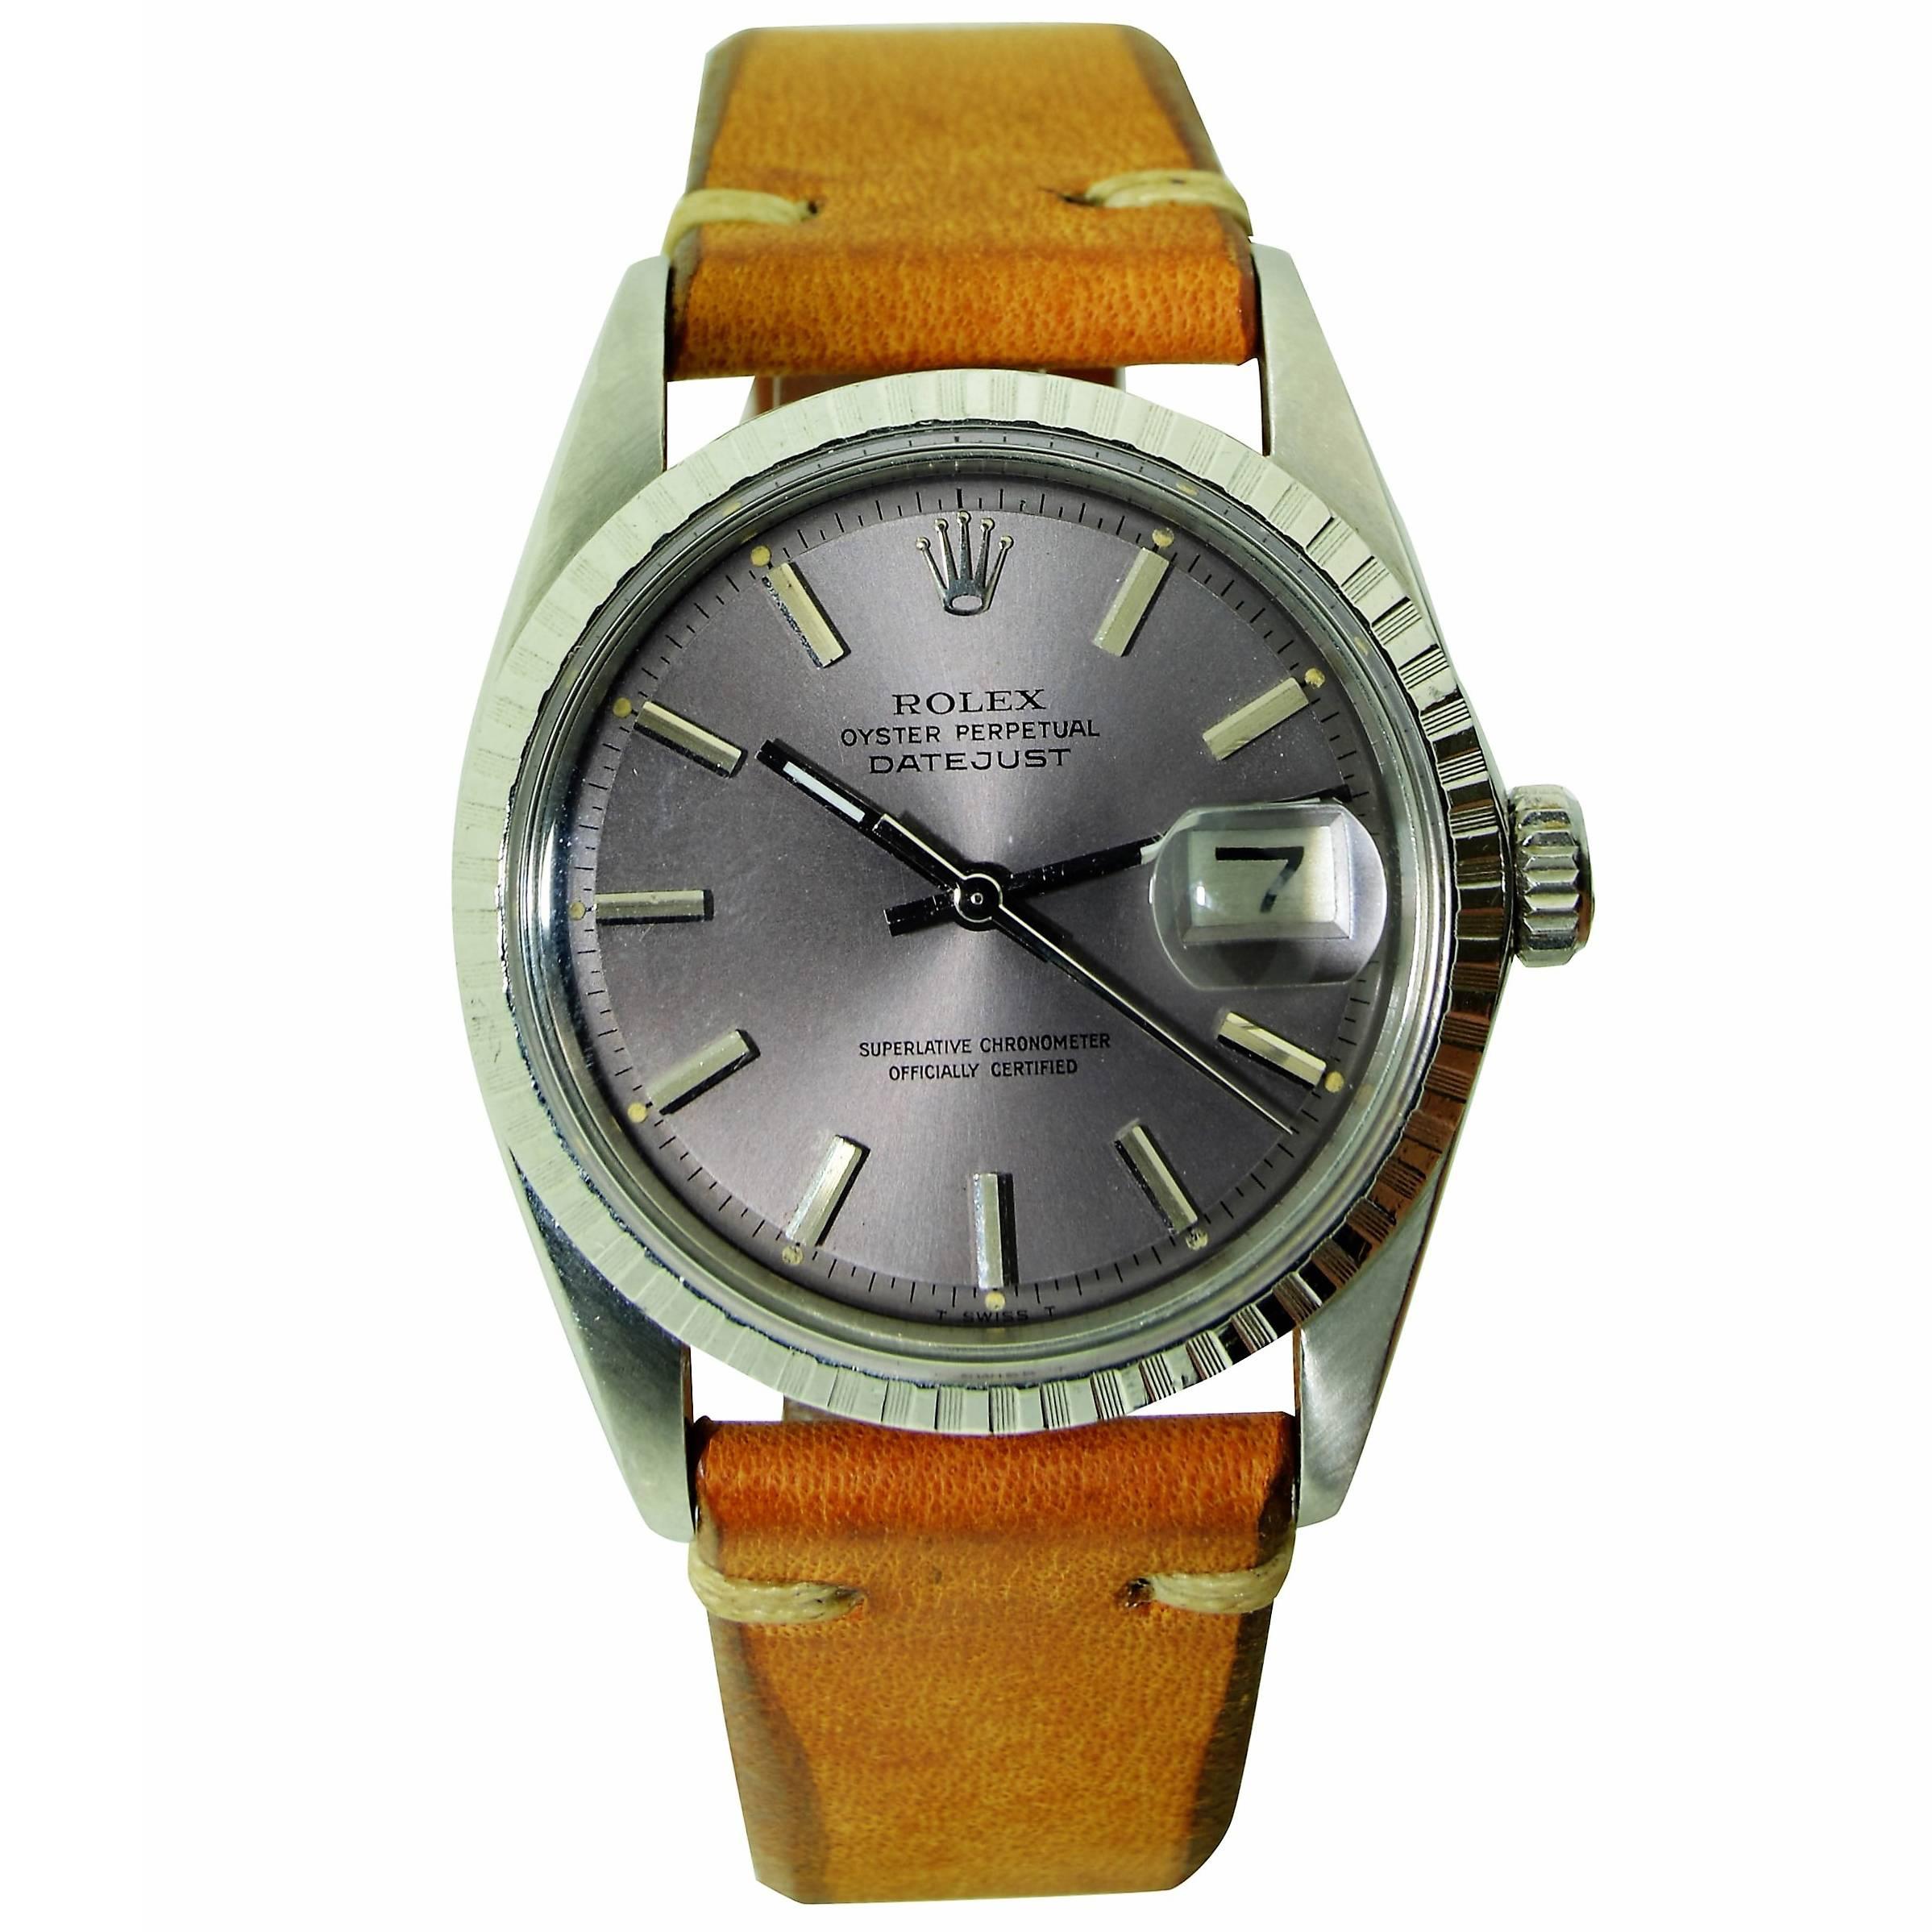 Rolex Stainless Steel Datejust Automatic Wristwatch Model 1601, circa 1970s